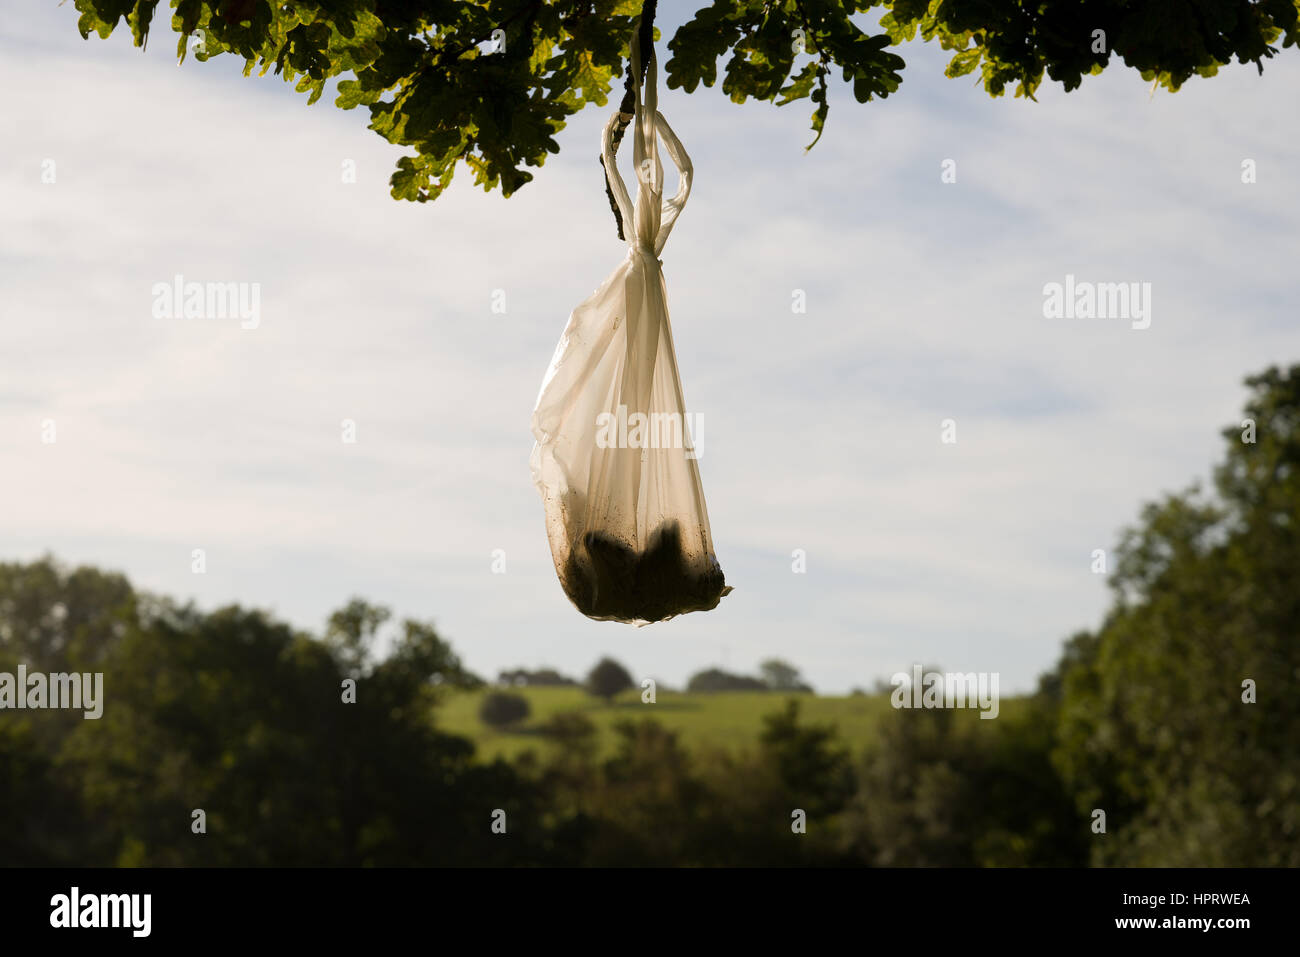 Dog poo bags left hanging, to be collected later. Stock Photo